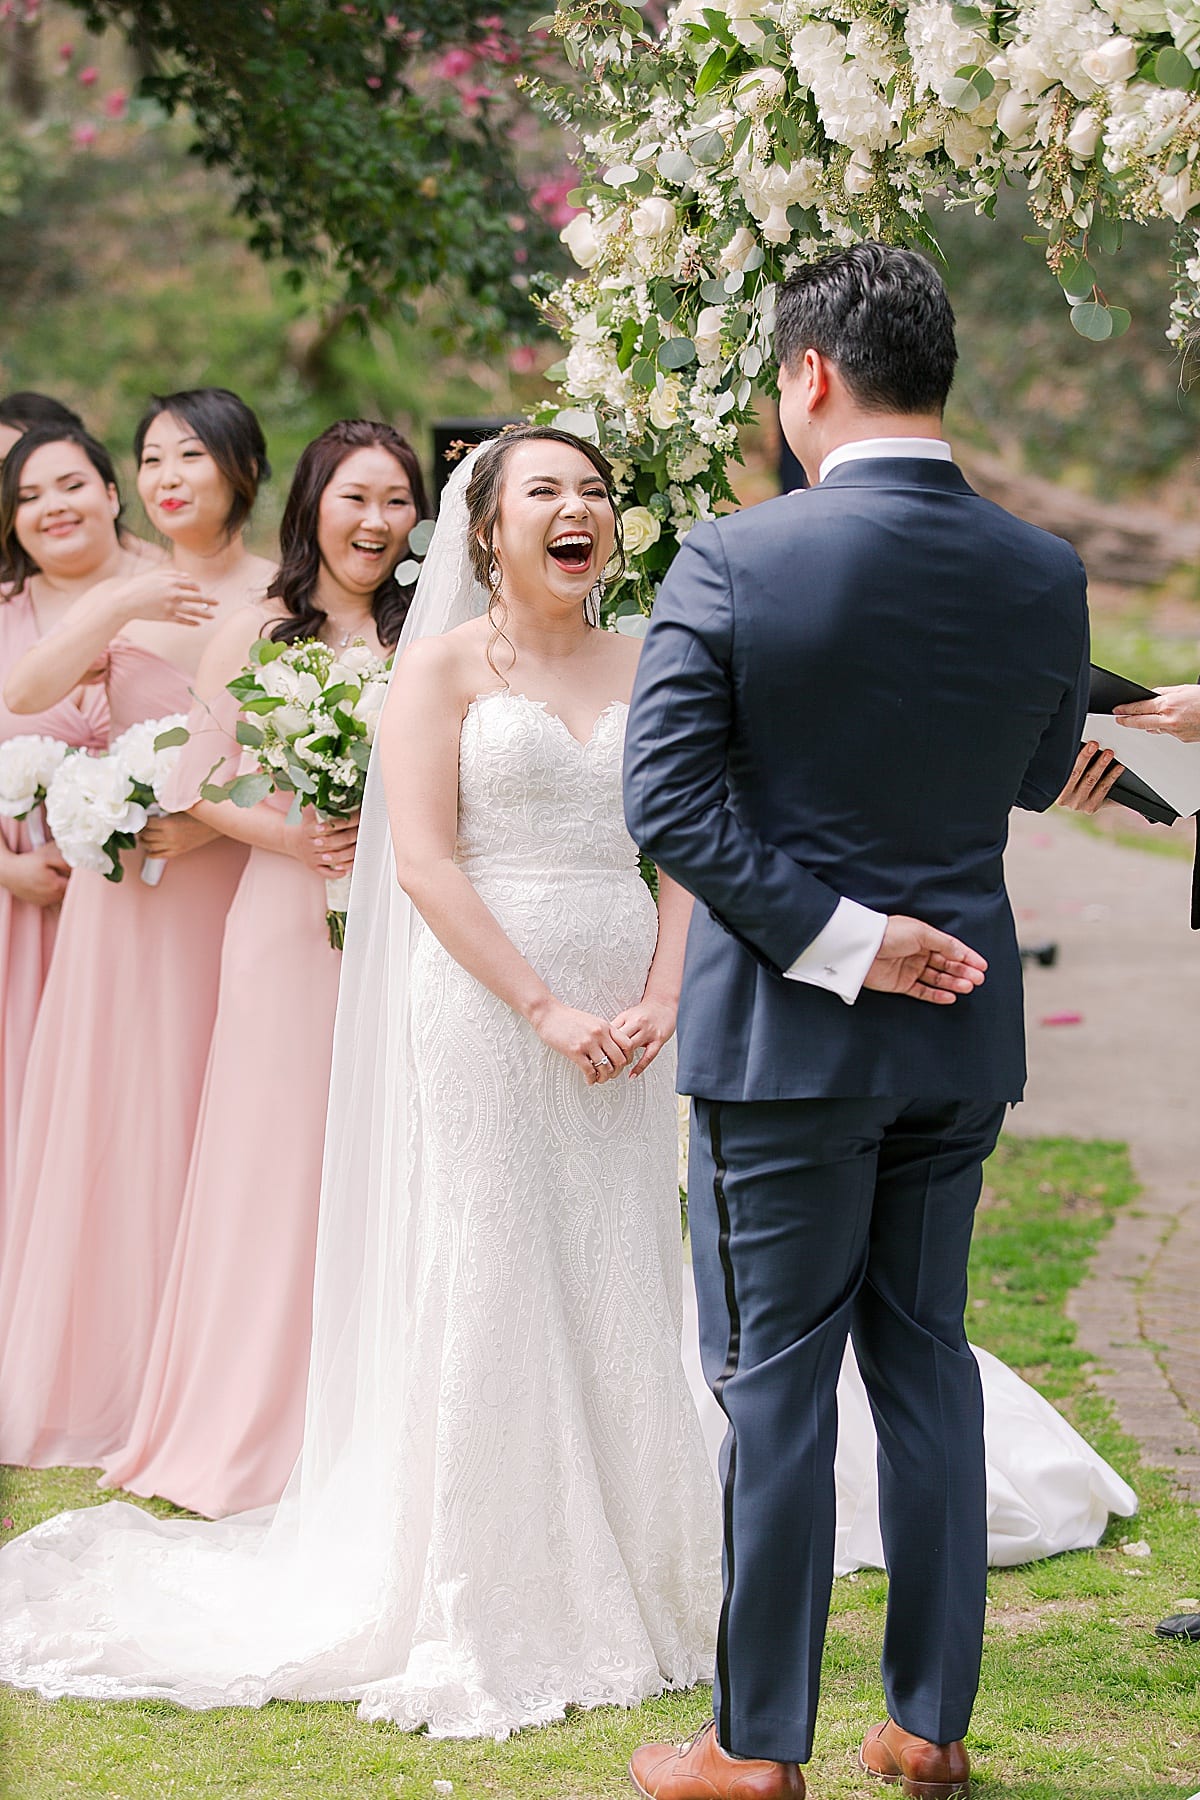 Cator Woolford Gardens Bride Laughing During Ceremony Photo